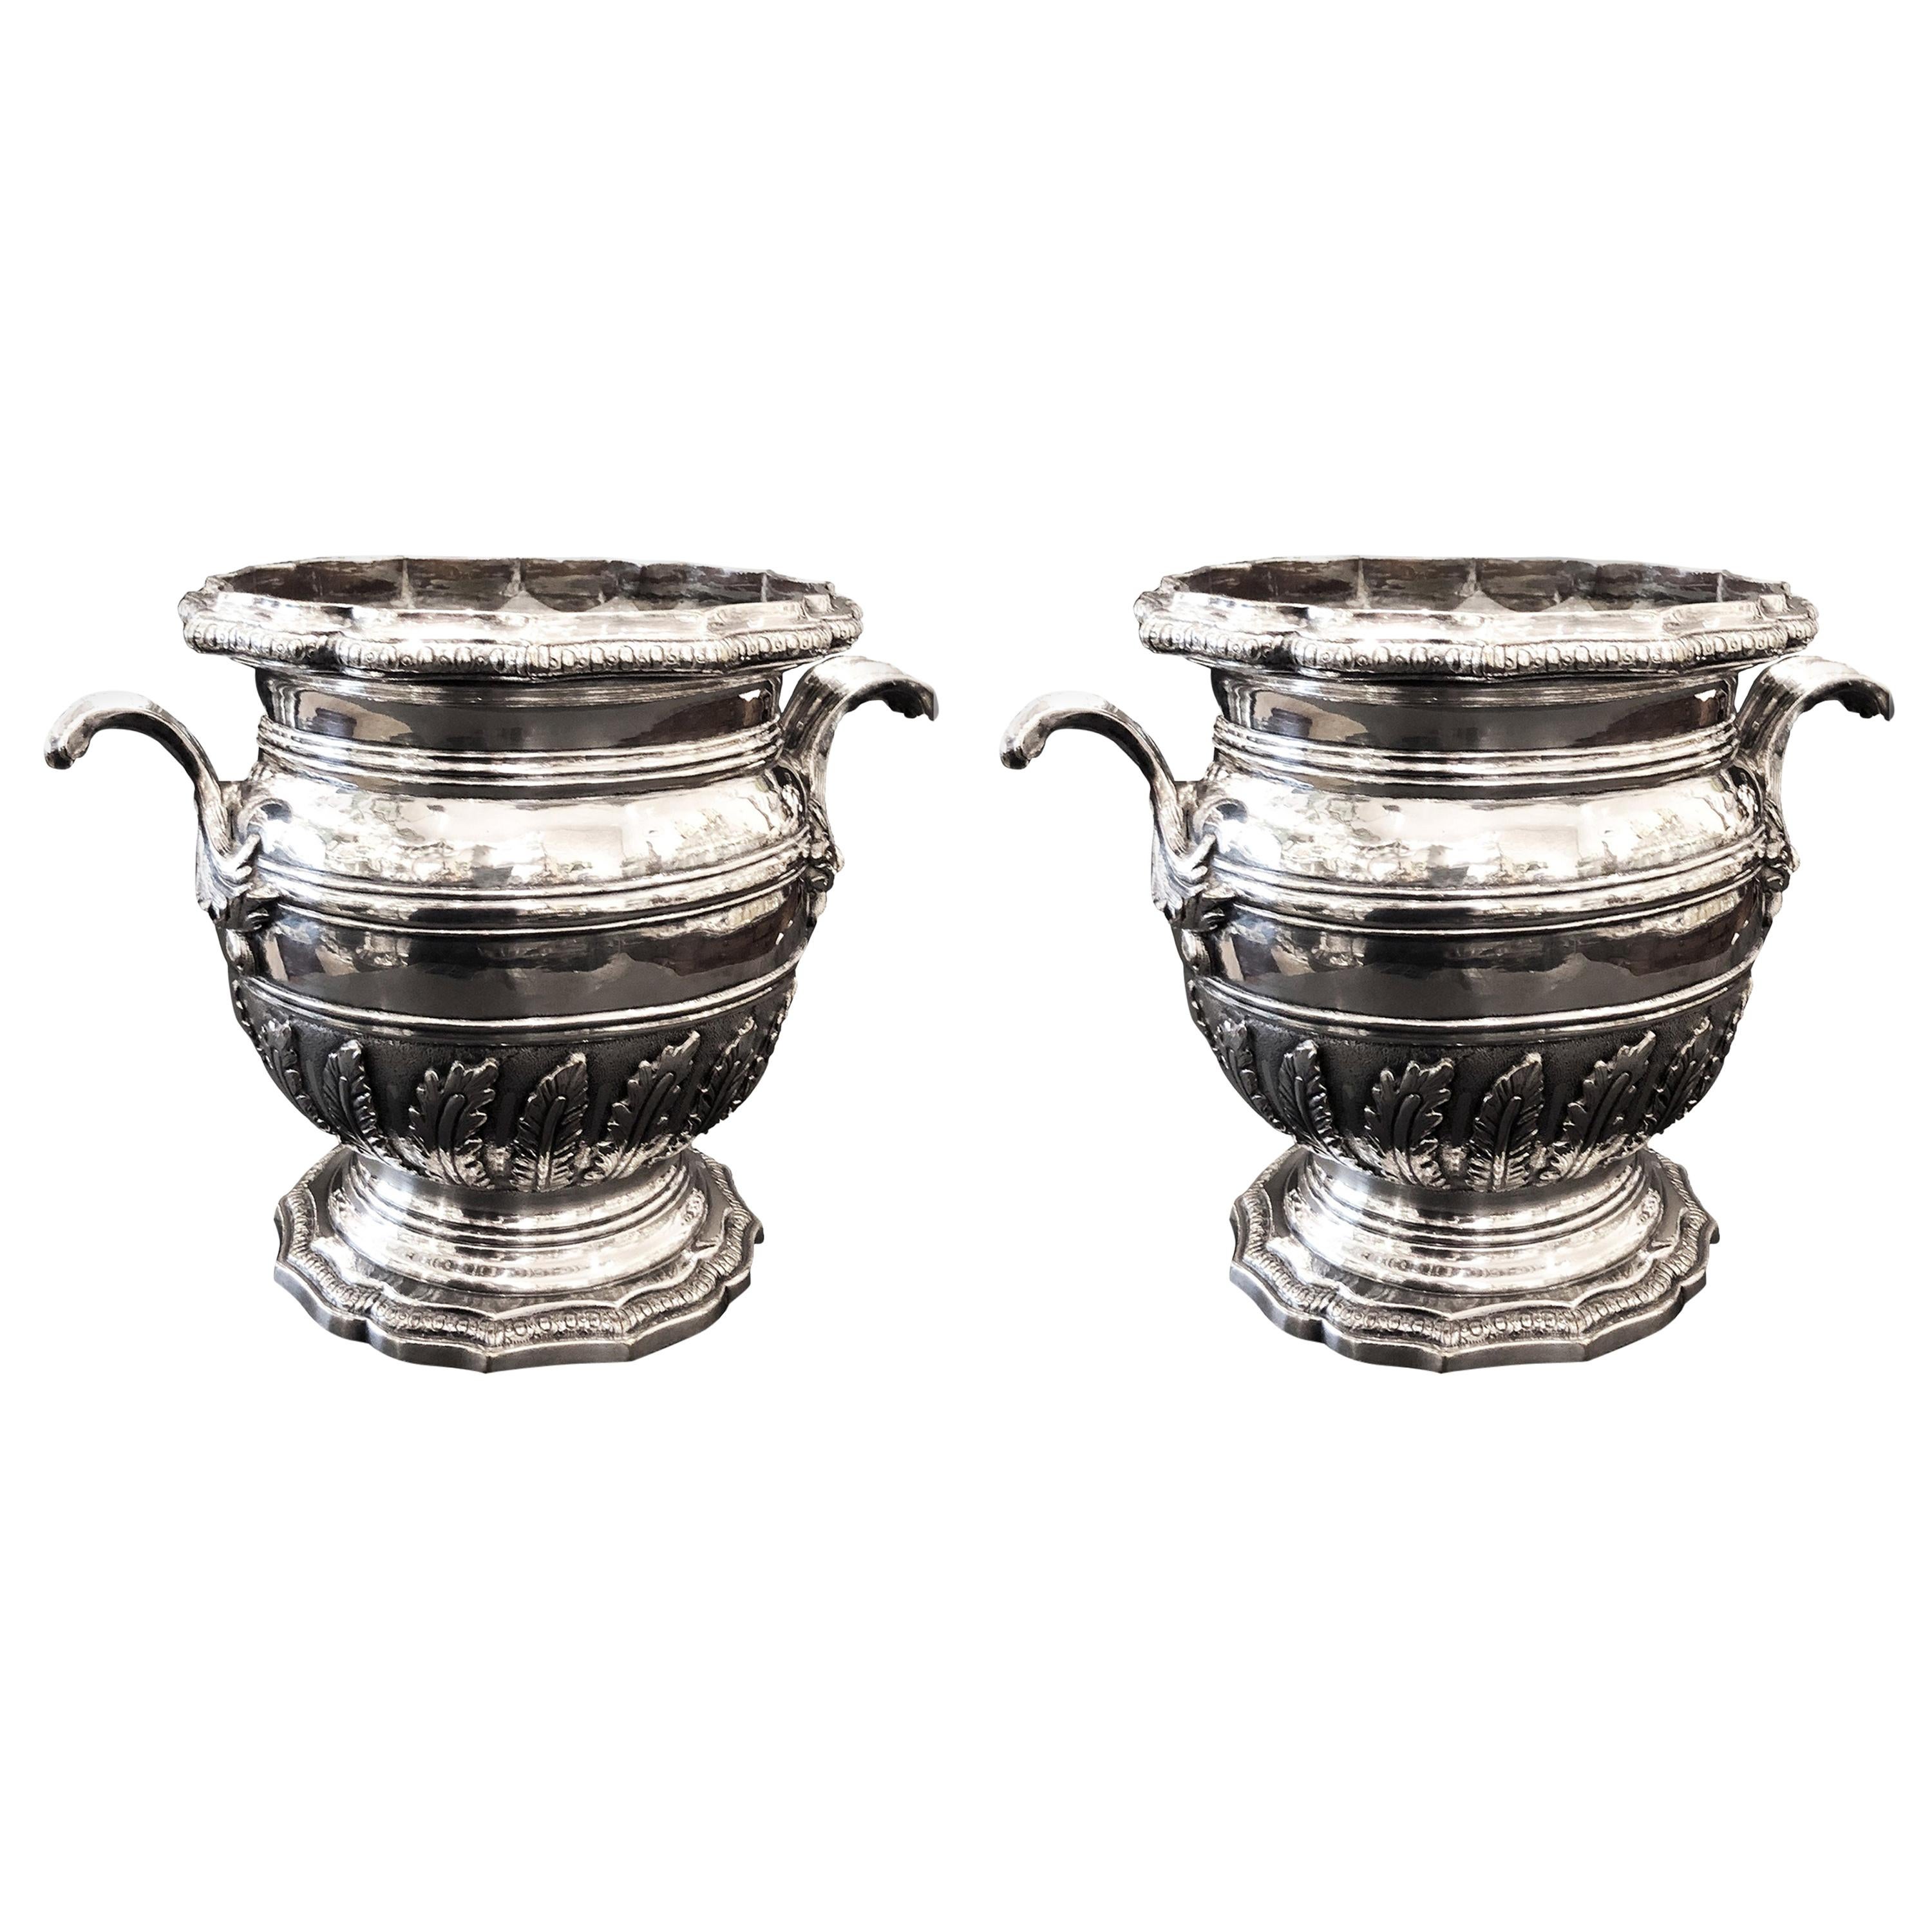 These rare large buckets are, mid-19th century, silver plated with a very nice patina, very talented work.
Their baluster form on stand, rocaille style, decorated with vegetal leaves reminds of Juste Aurèle Meissonnier style, 

Christofle is one